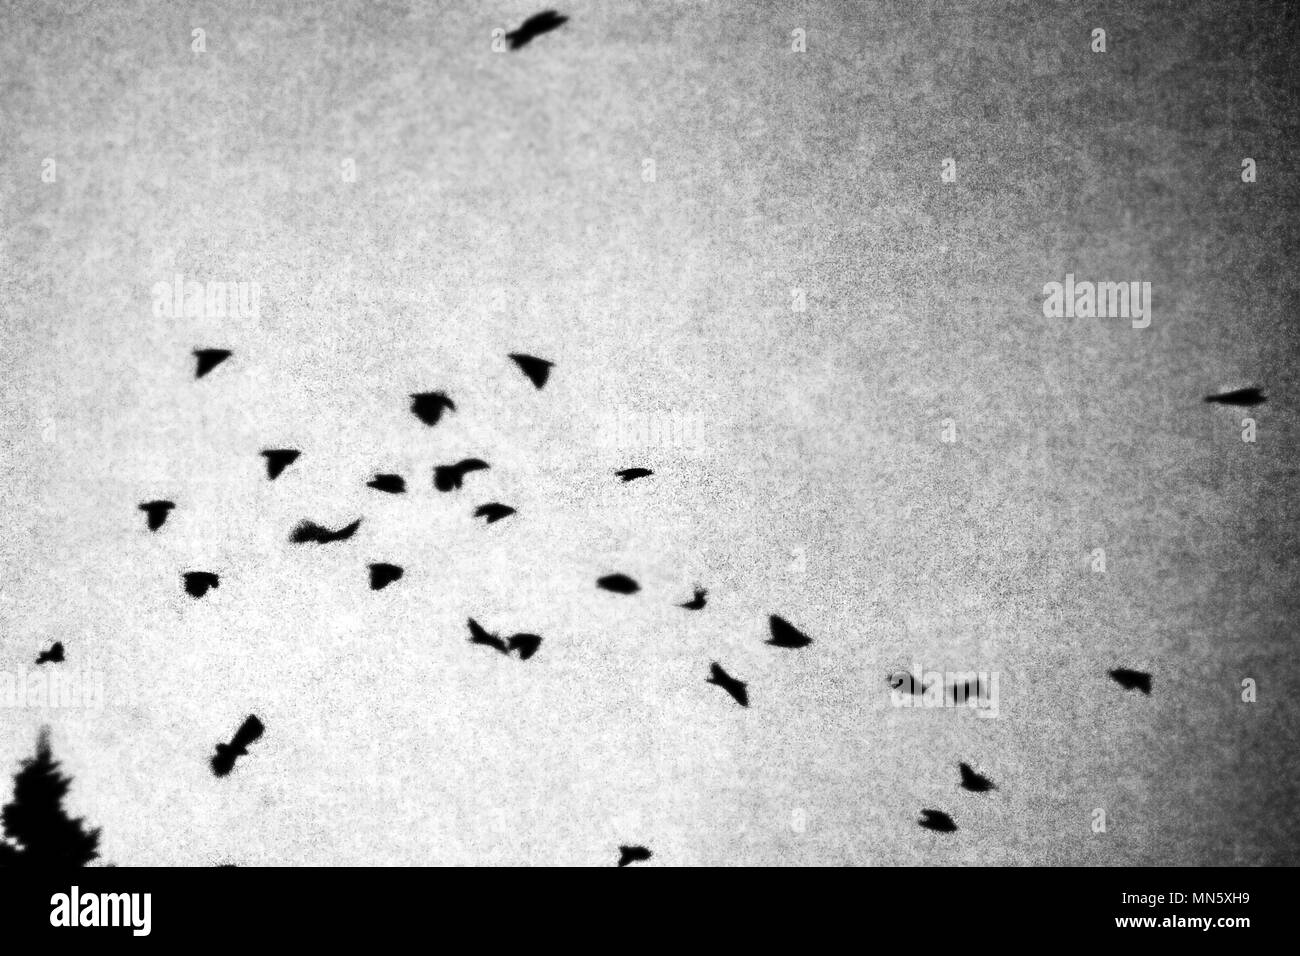 flock of crows at dusk. Retro style, black and white grainy picture Stock Photo